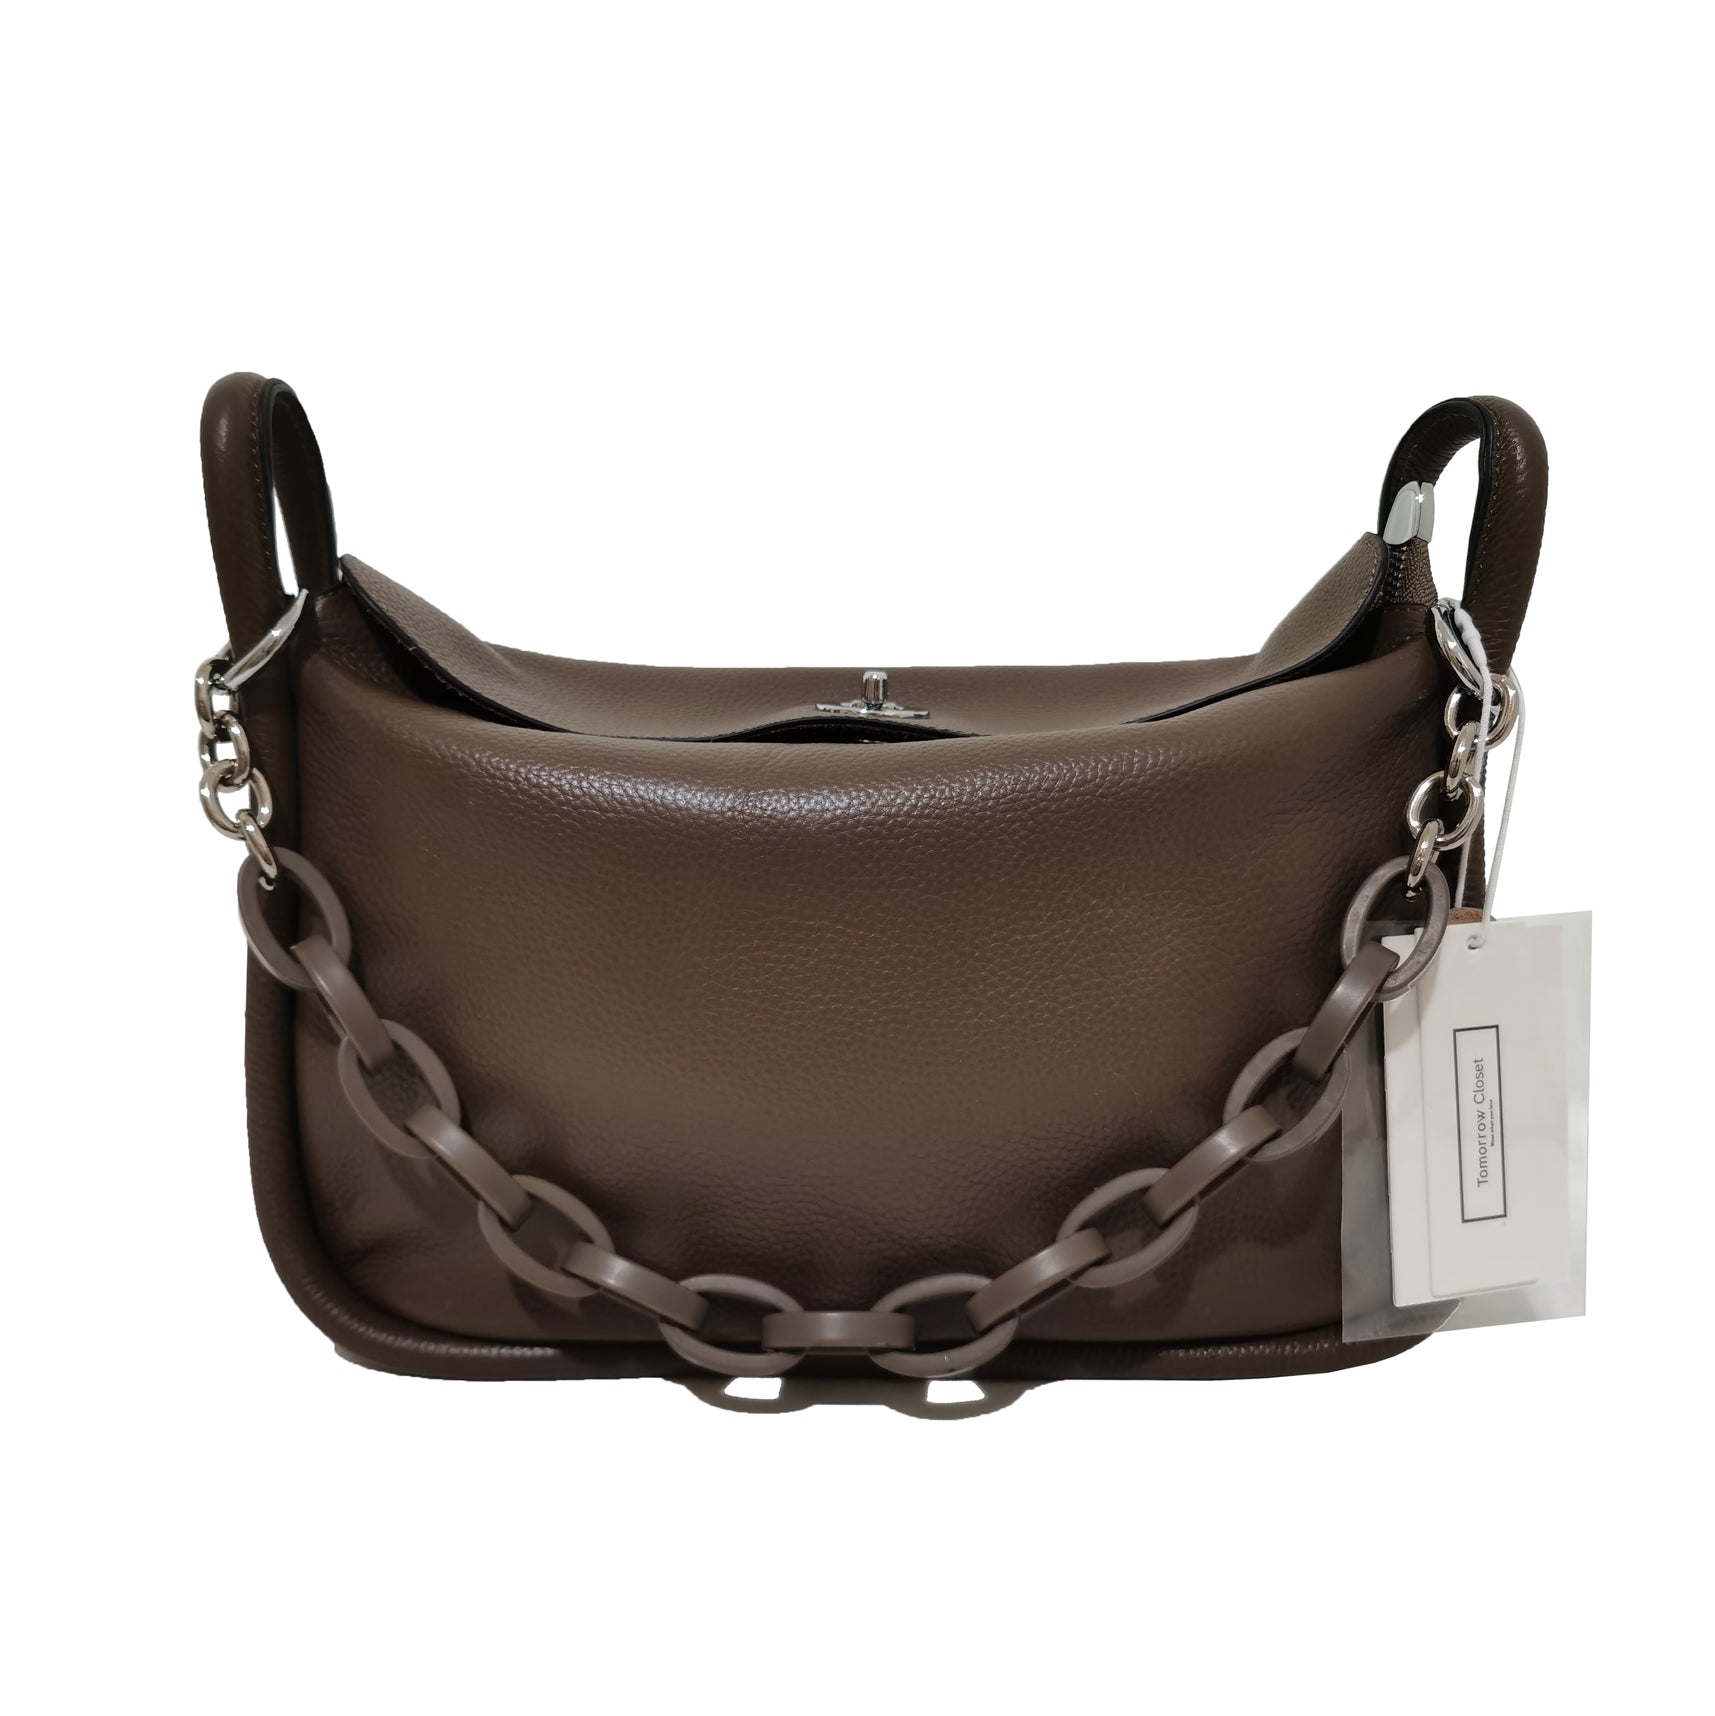 Women's genuine cowhide leather handbag Two Handle Chain design with two removable strap by Tomorrow Closet